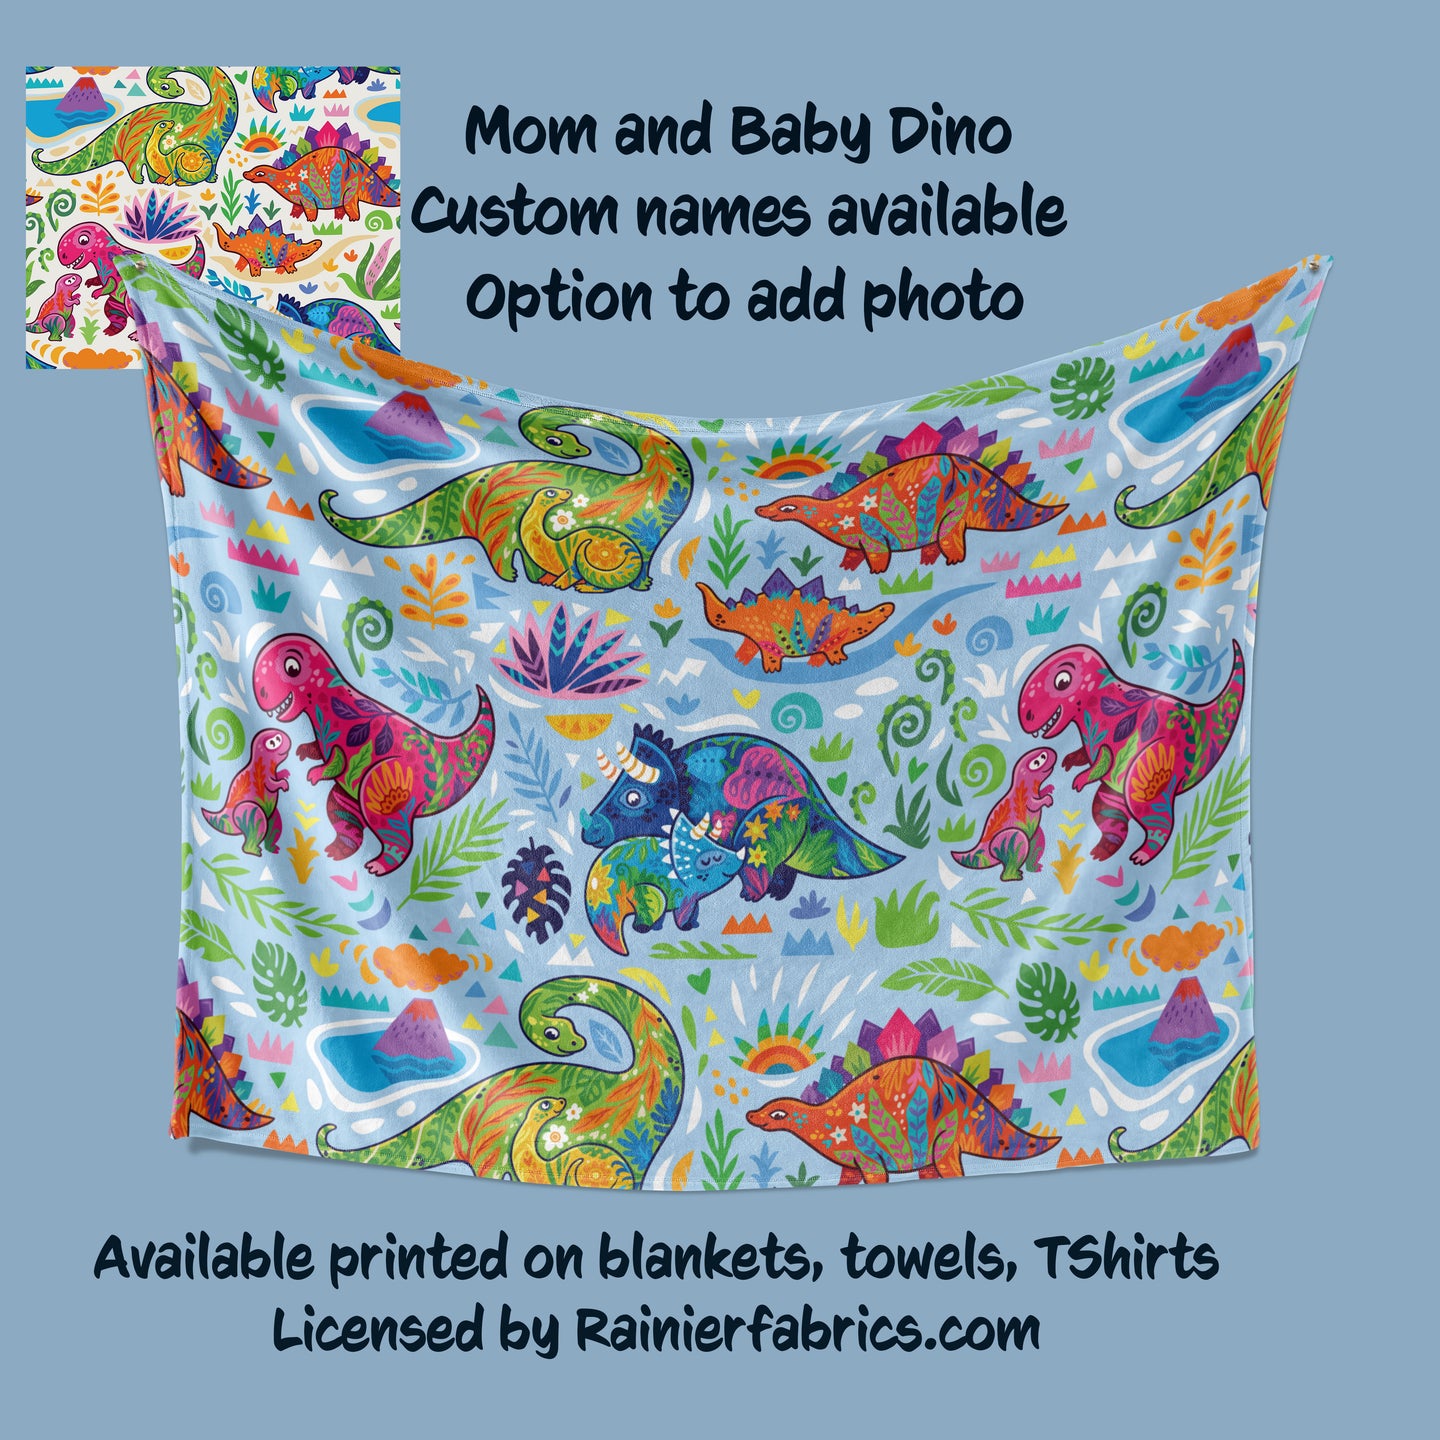 Mom and Baby Dino - Blanket